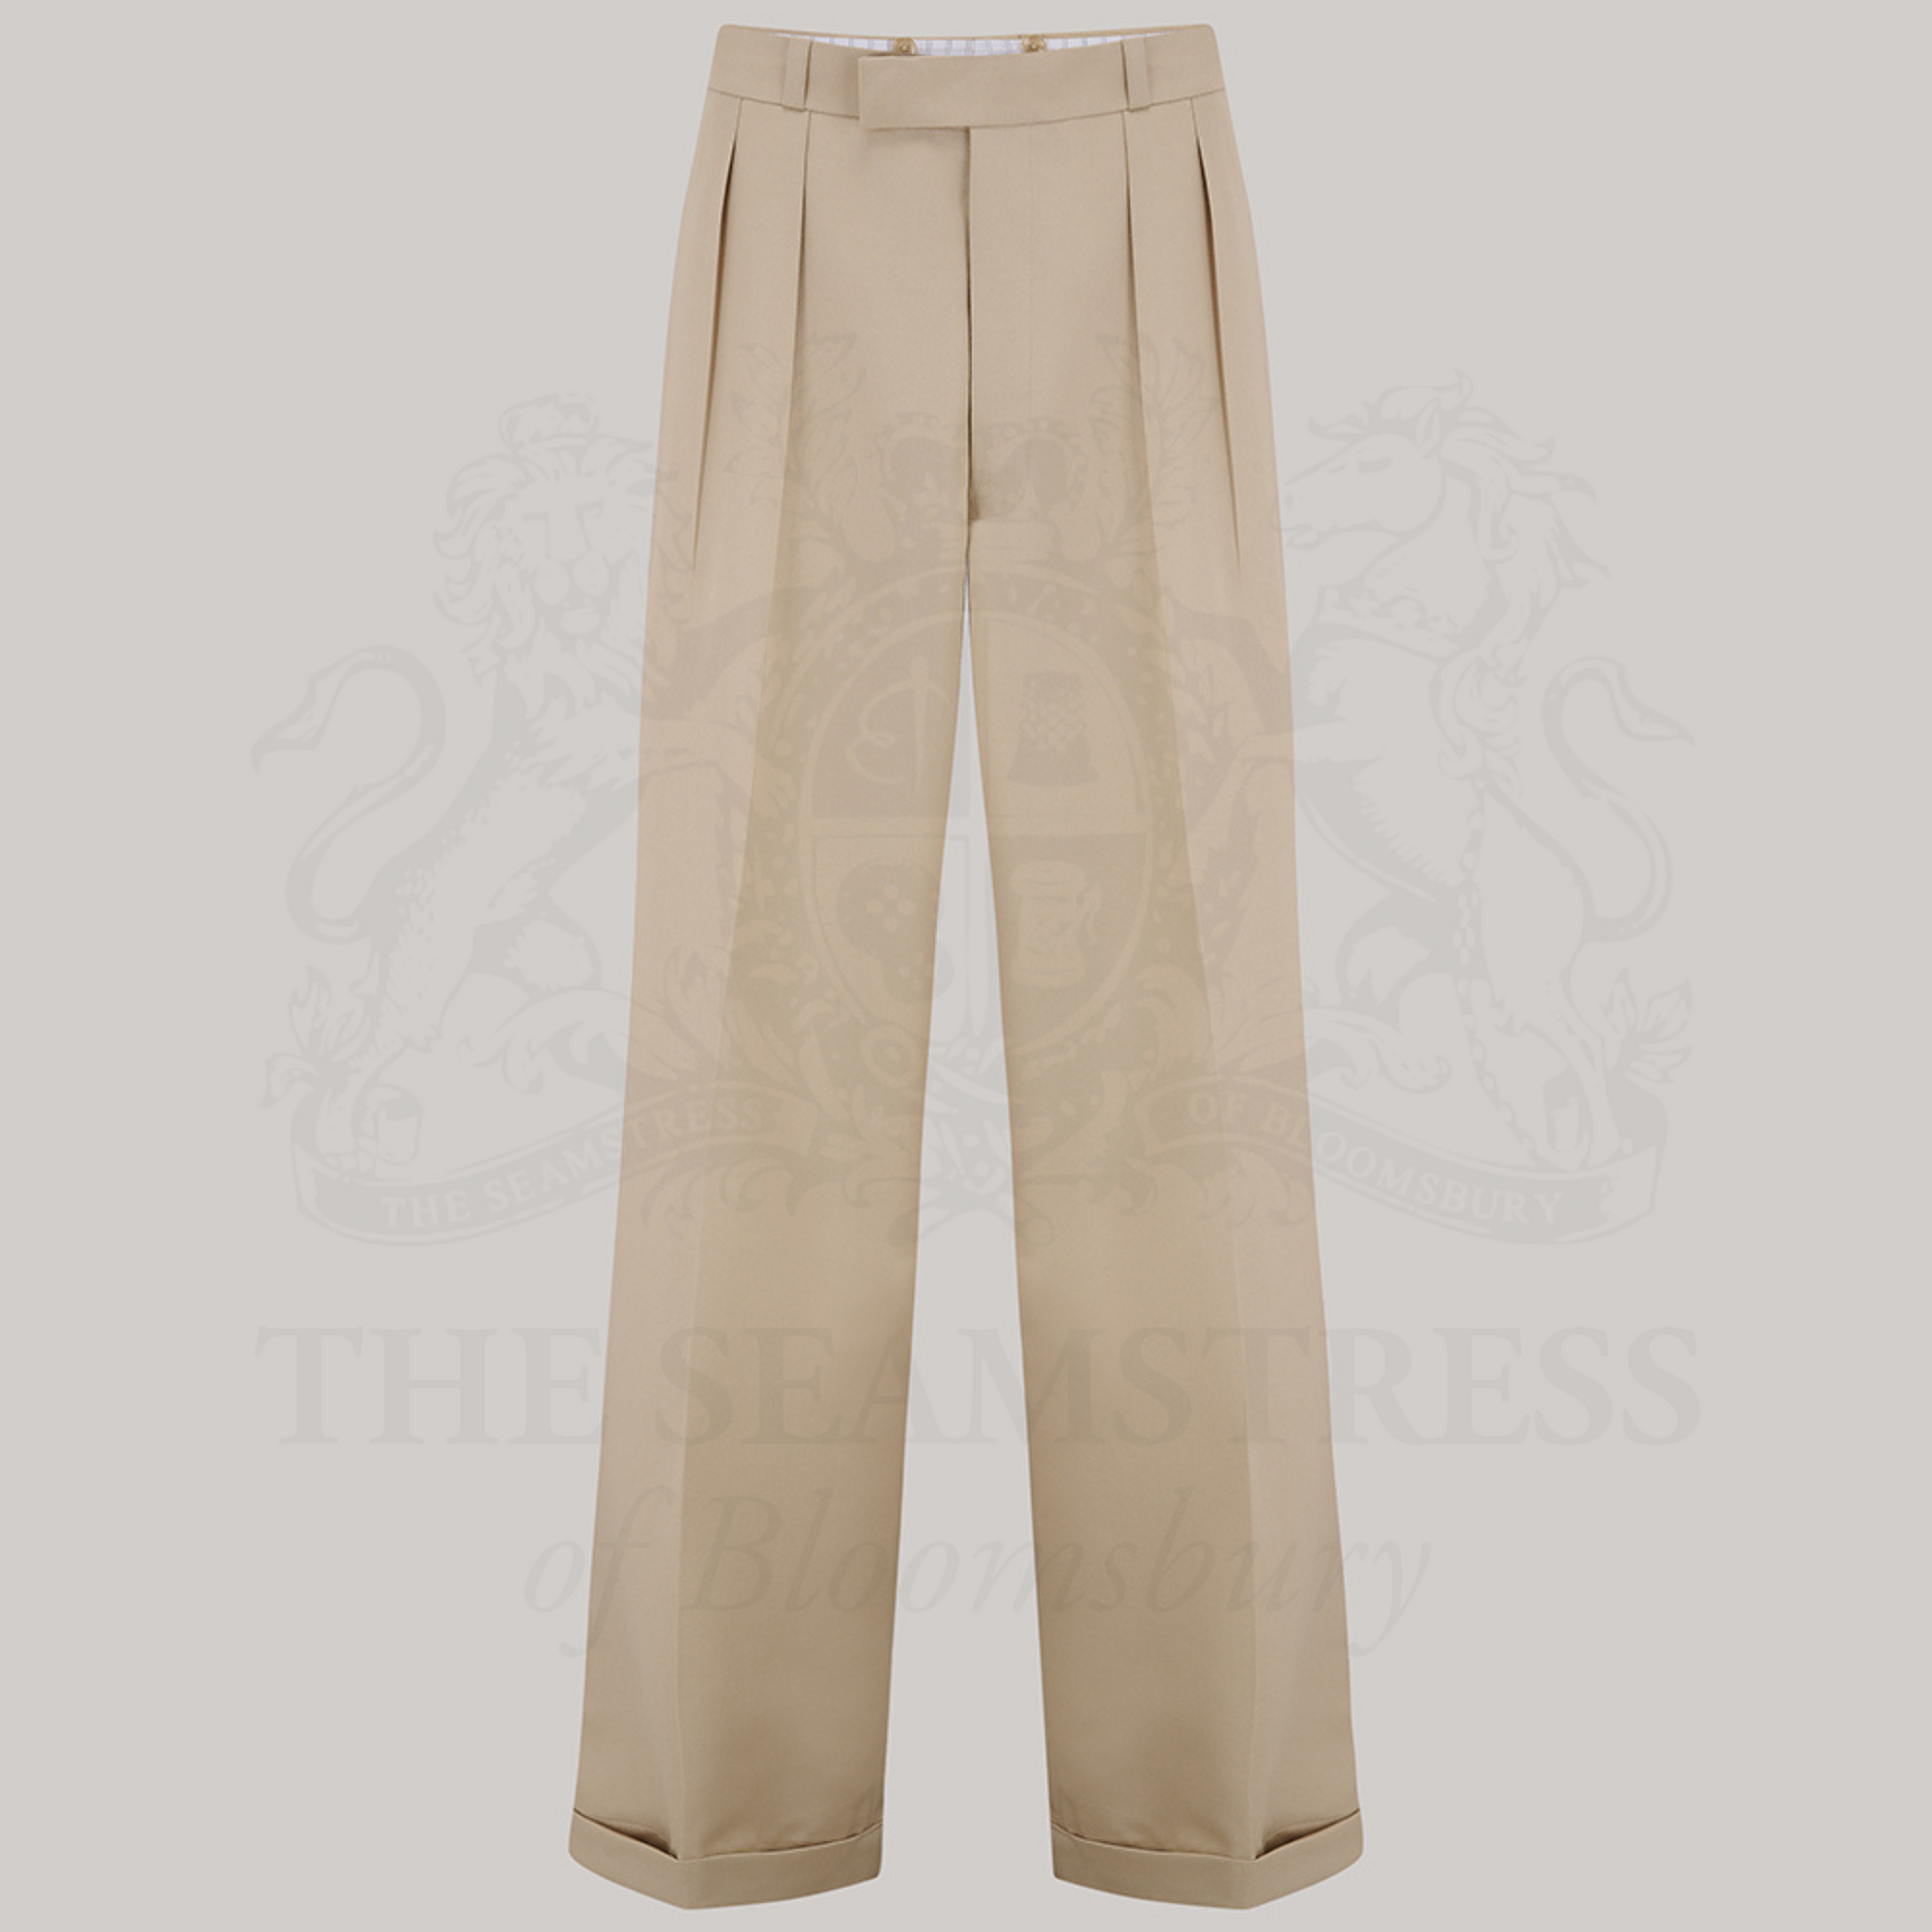 Buy Vintage Trousers Online In India  Etsy India